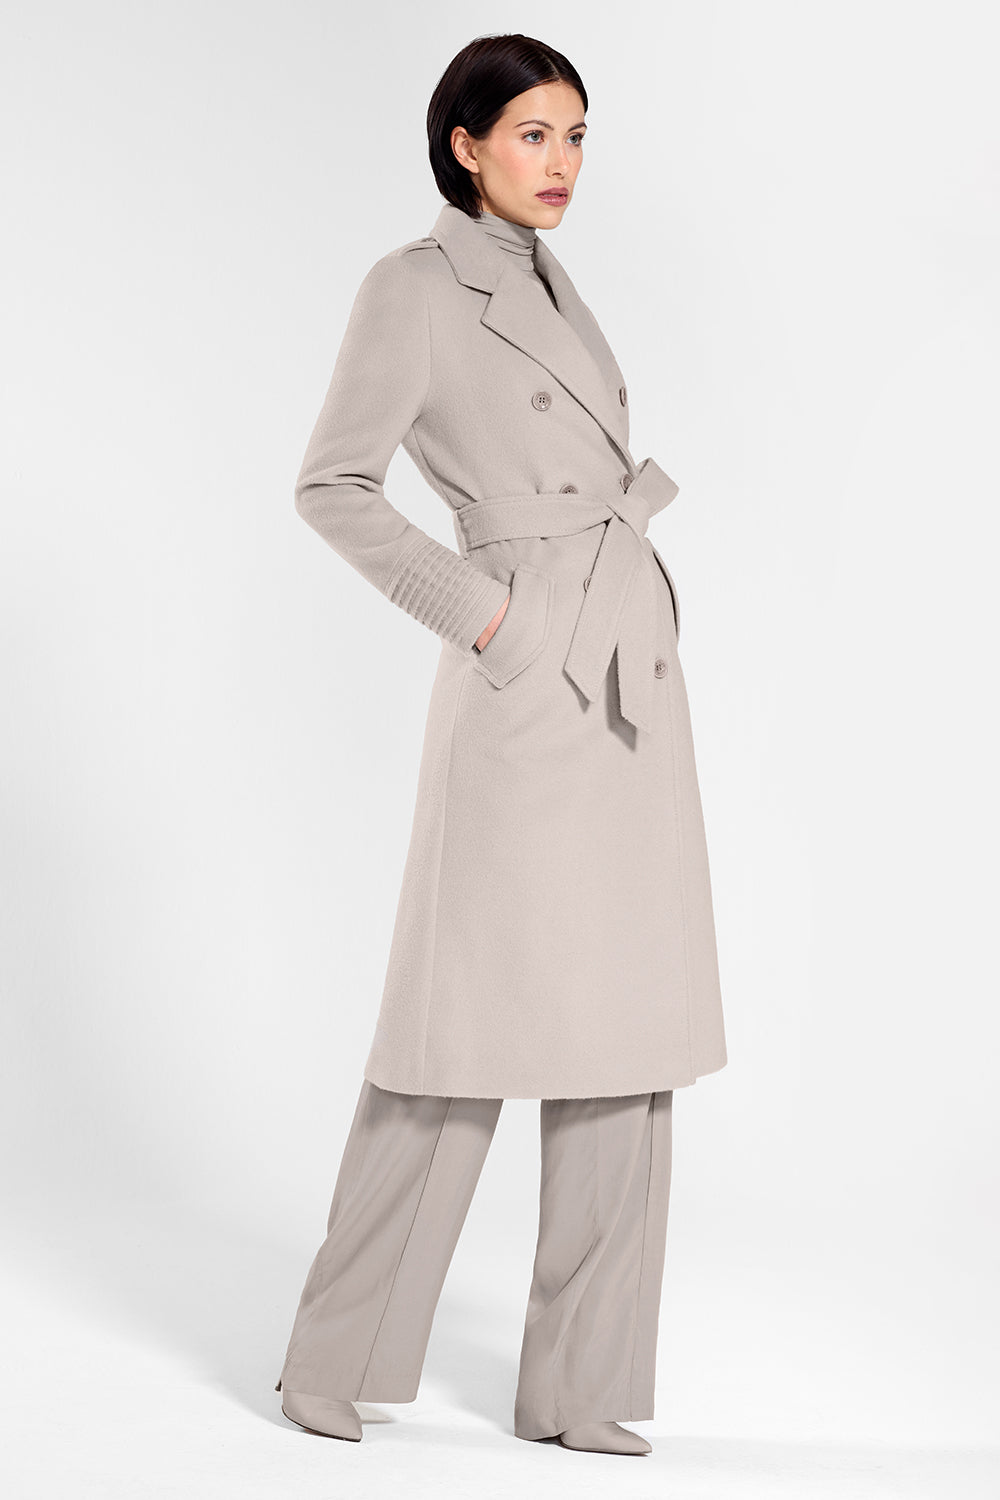 The 21 best women's trench coats: Our favorite classic pieces